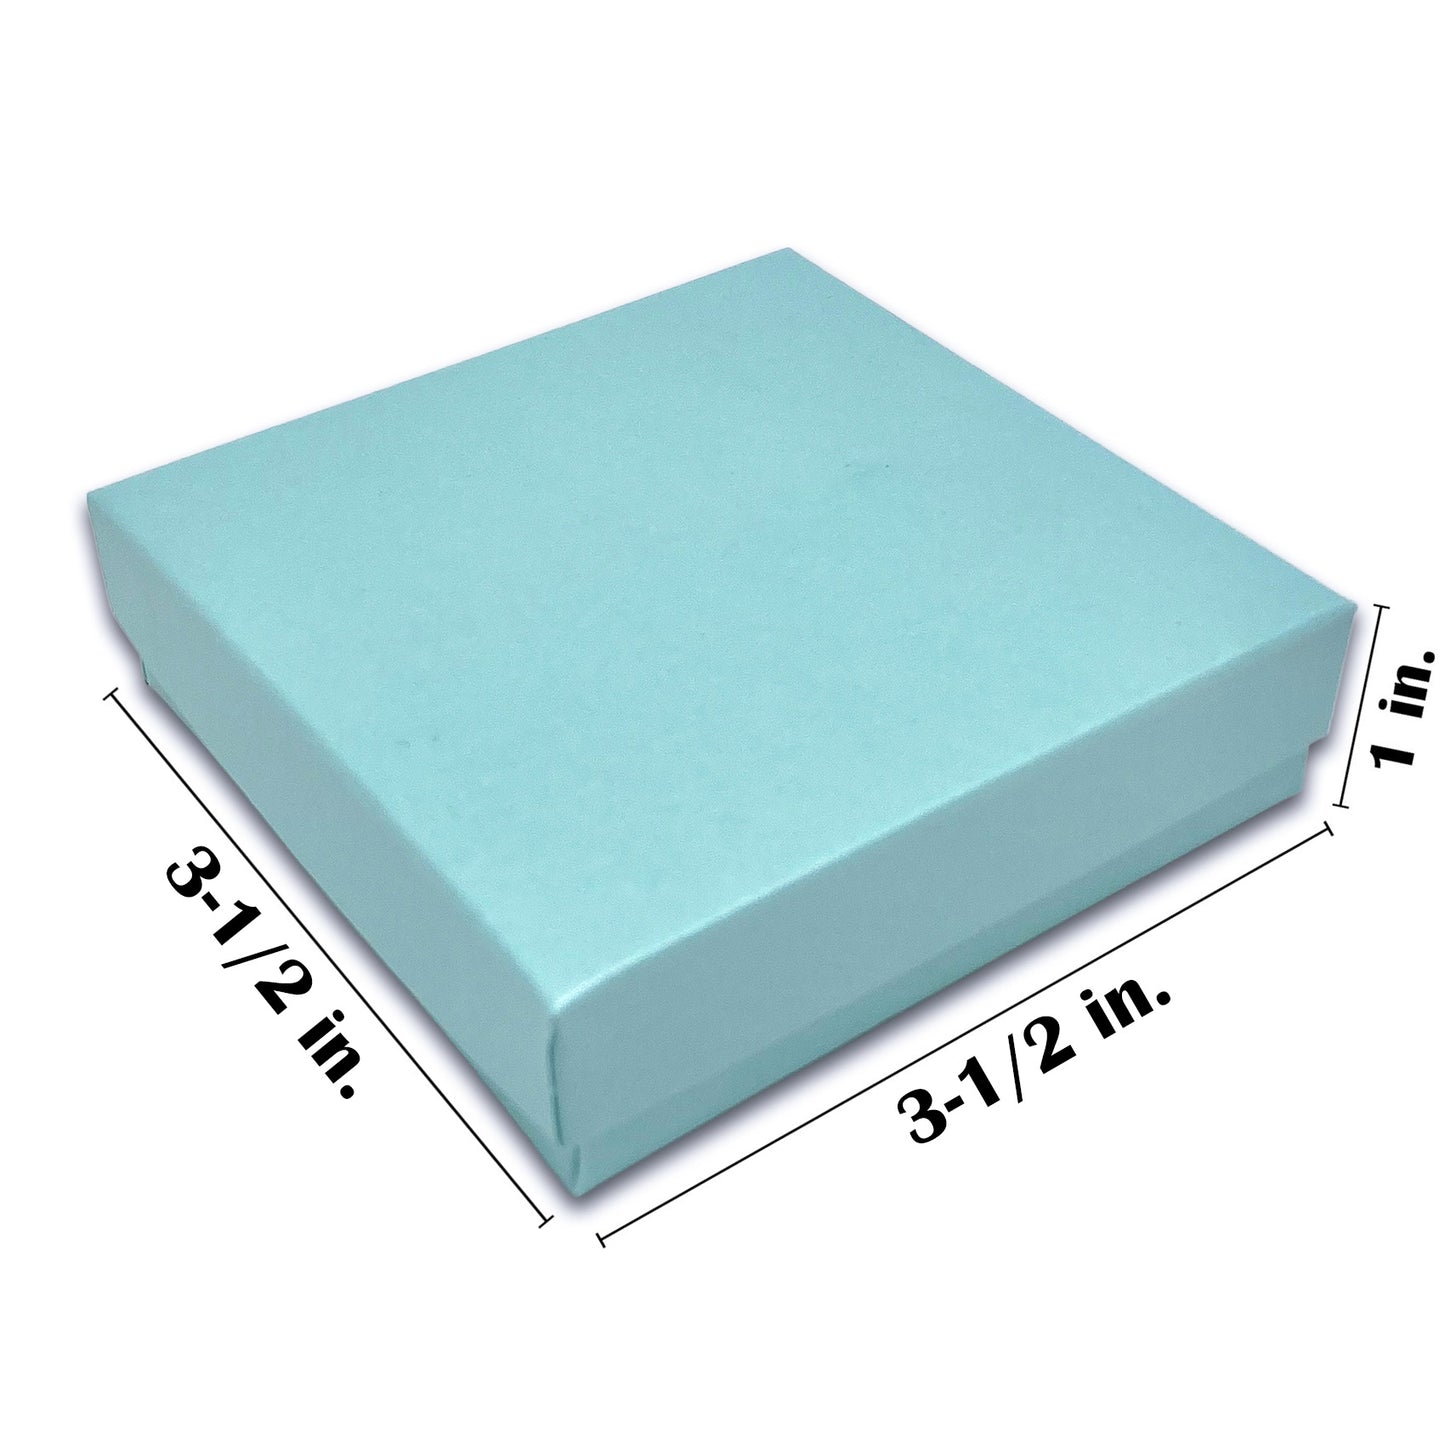 3 1/2" x 3 1/2" x 1" Light Pearl Teal Cotton Filled Paper Box